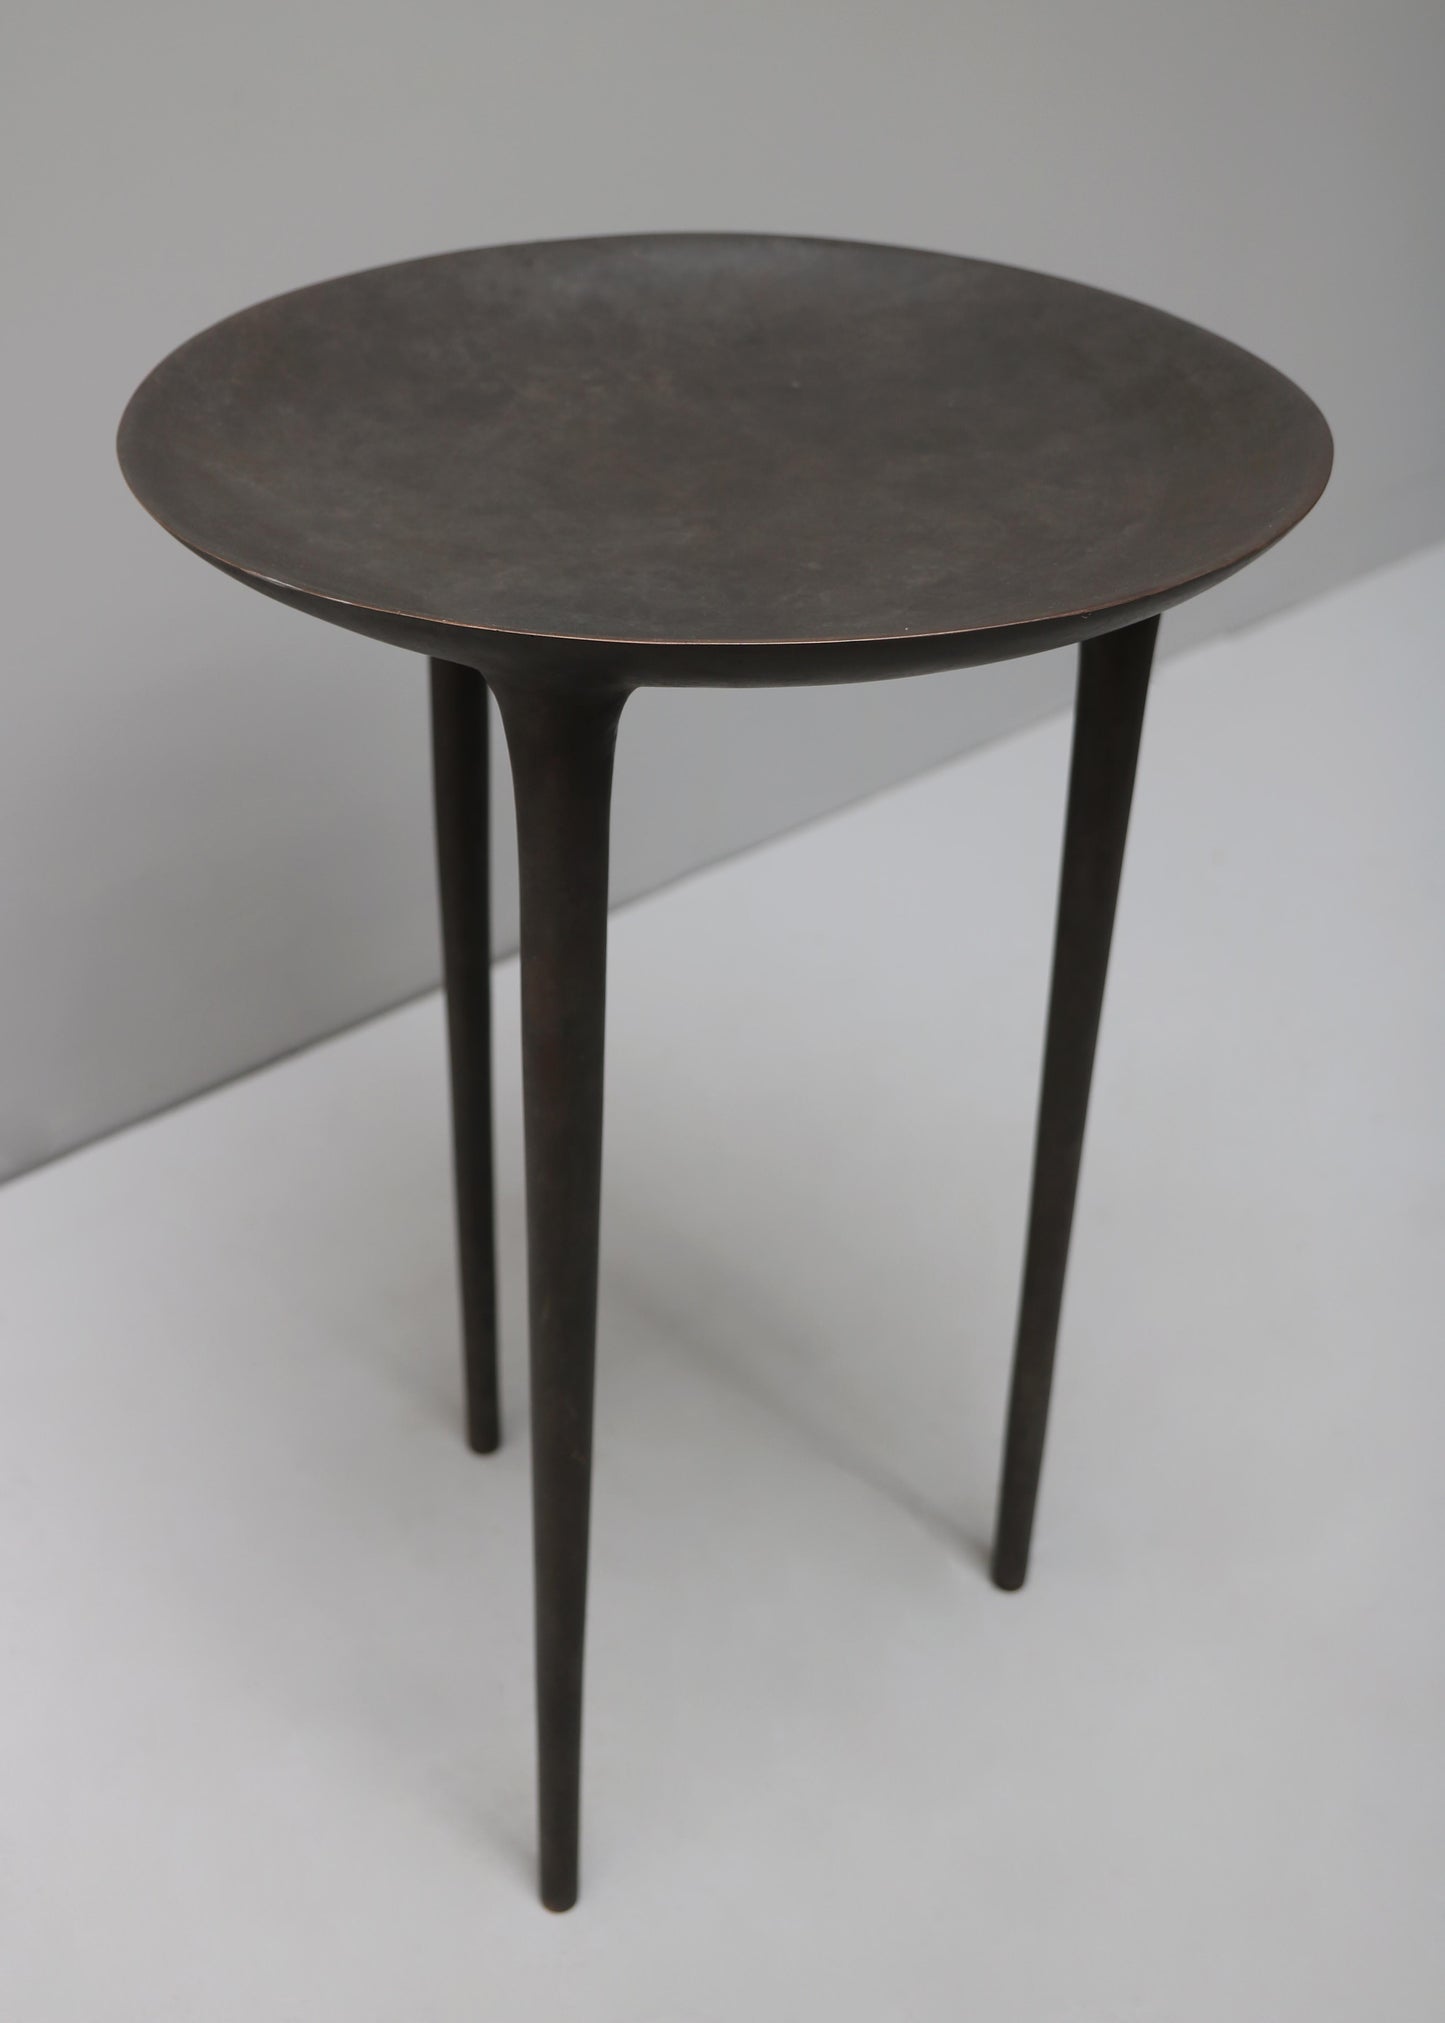 BRAZIER SIDE TABLES BY RICK OWENS